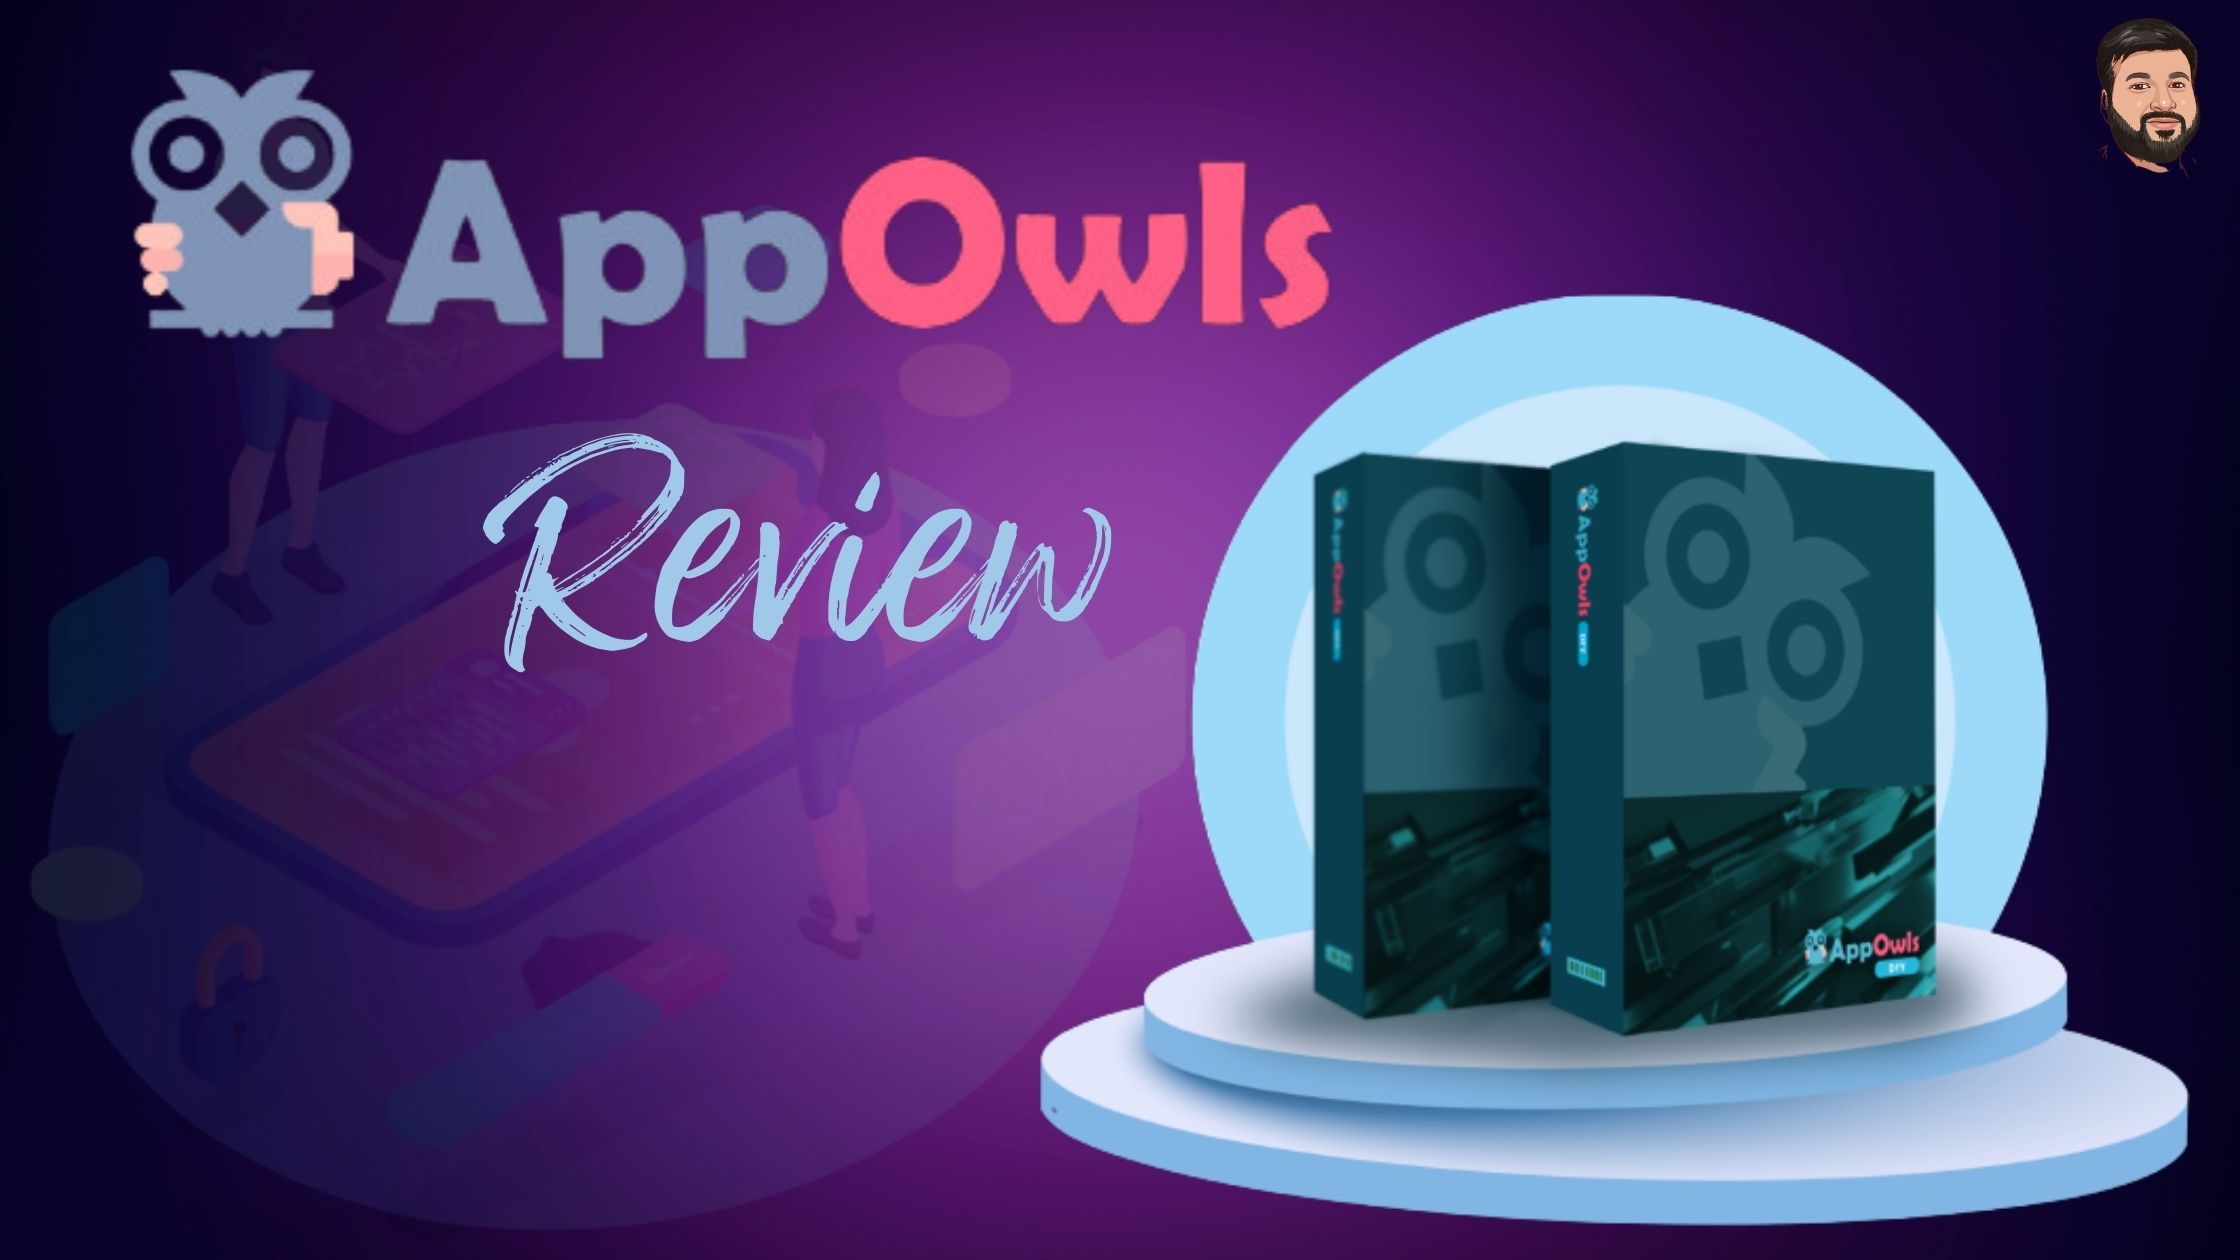 AppOwls Review: 100% Unbiased and Honest (Worth Buying?)